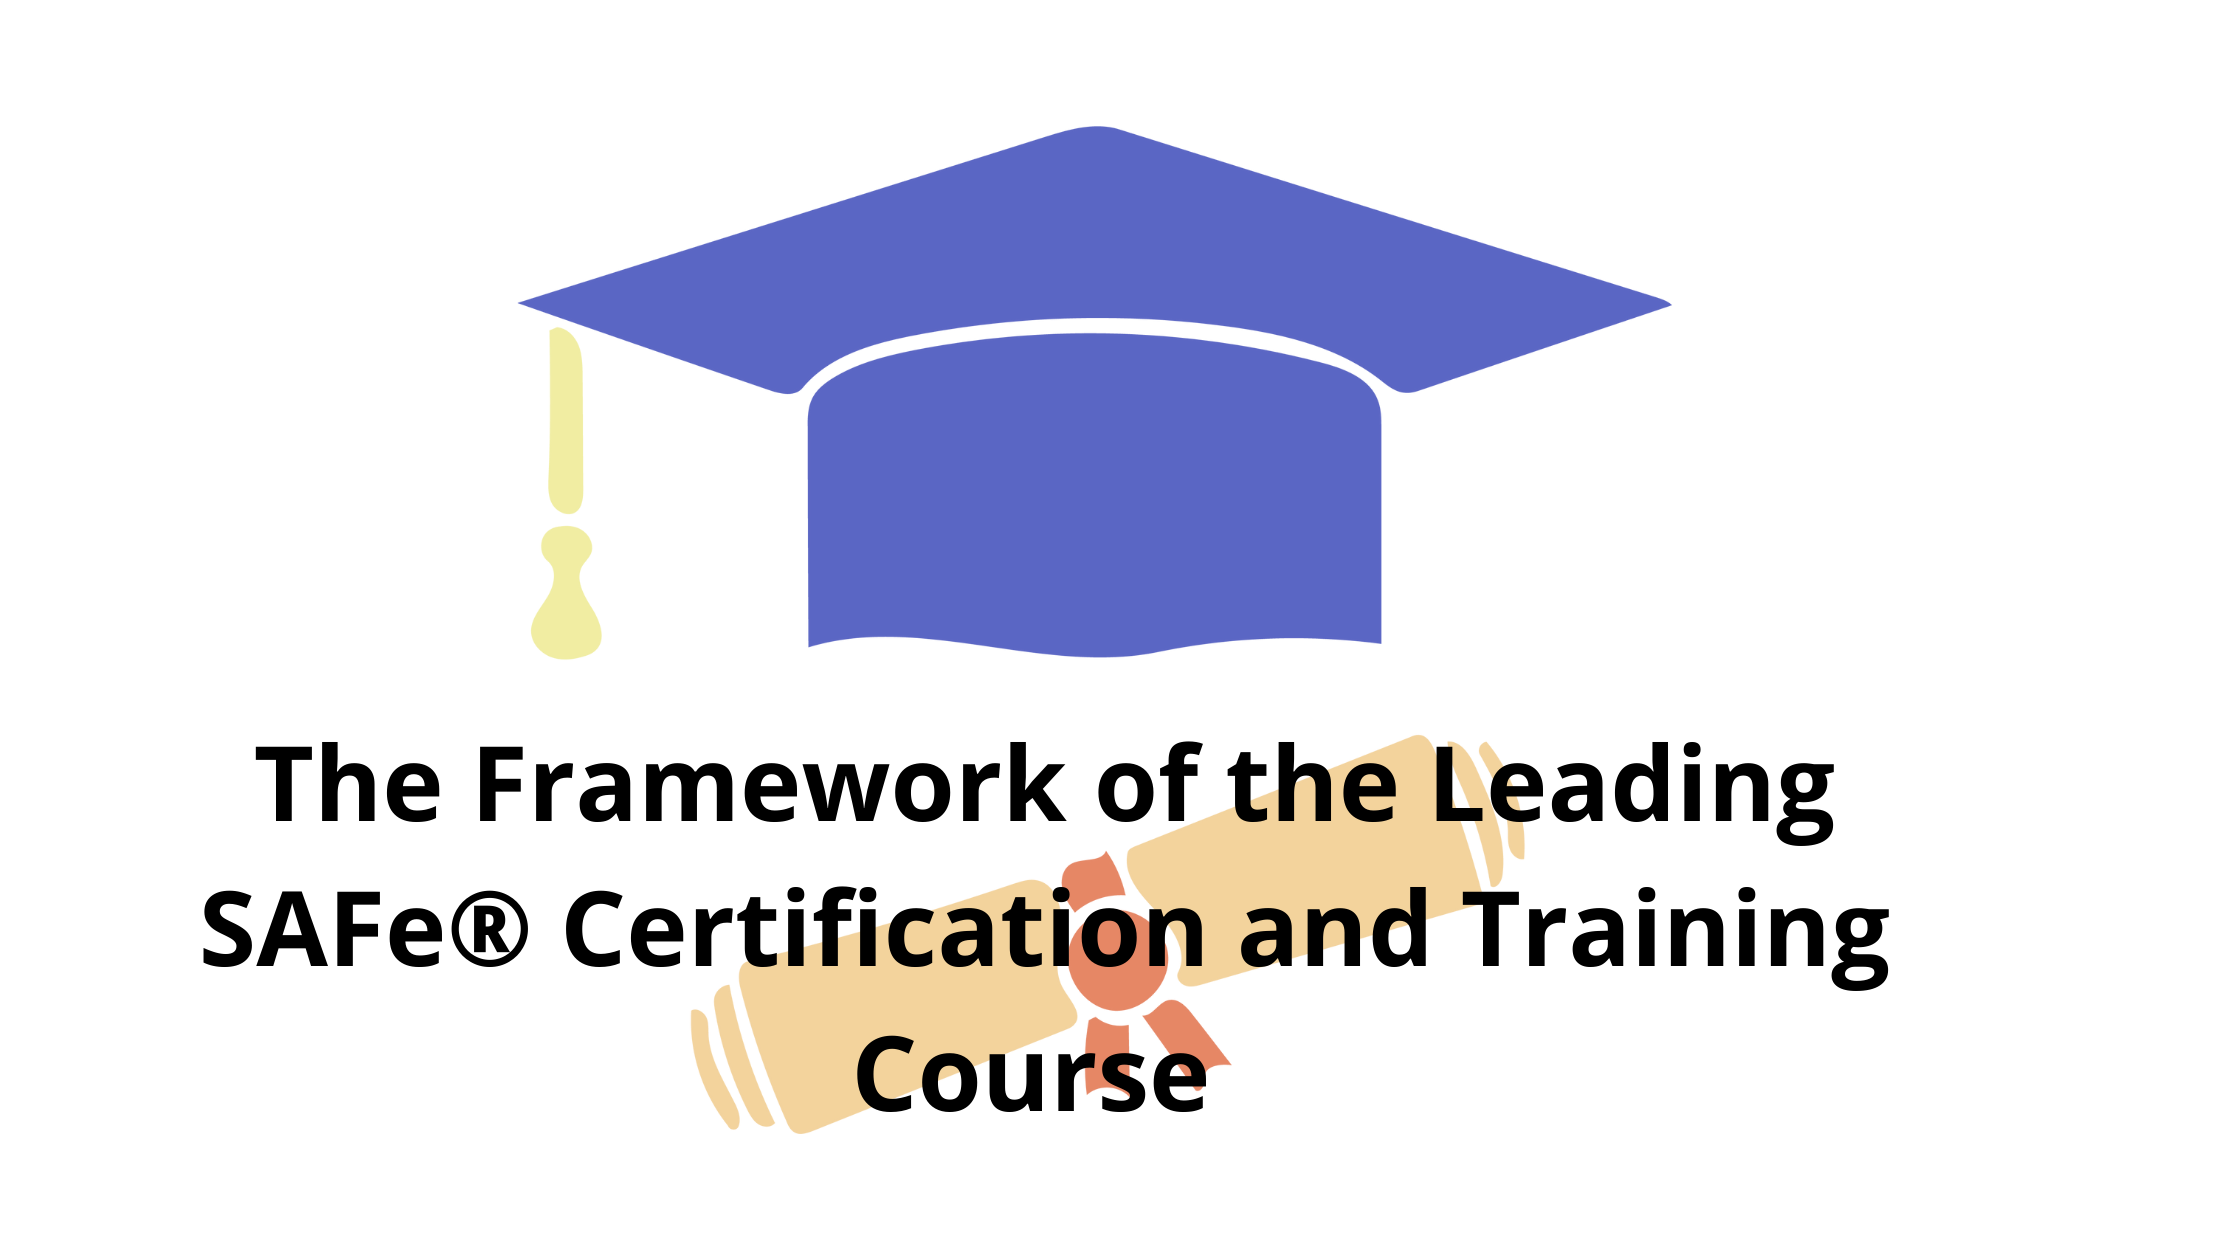 The Framework of the Leading SAFe® Certification and Training Course 